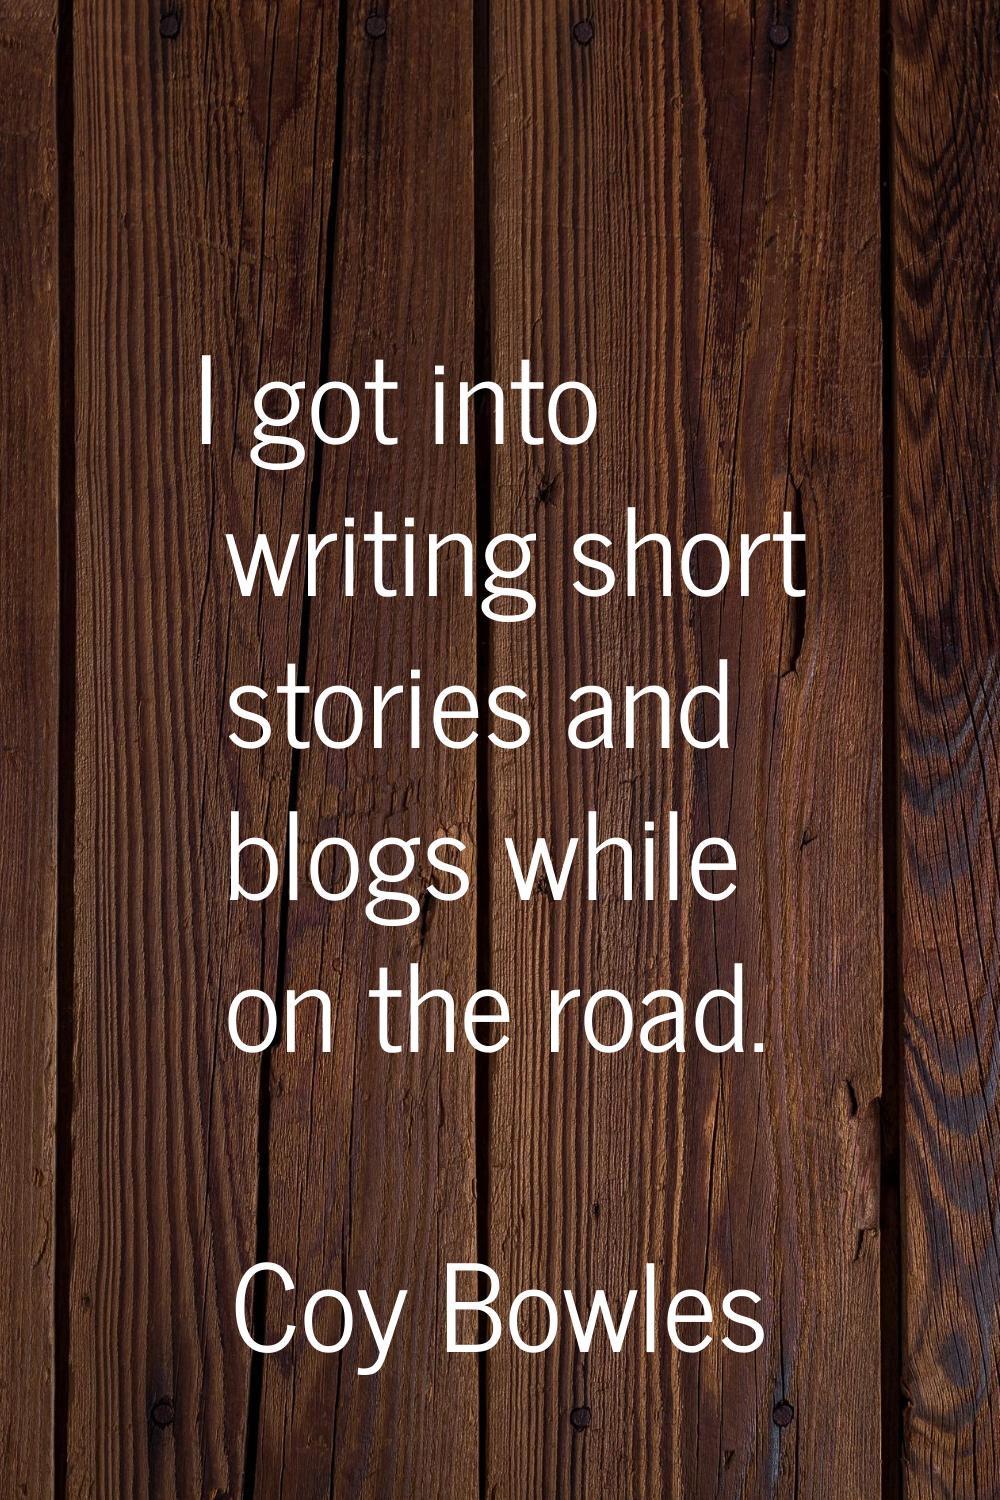 I got into writing short stories and blogs while on the road.